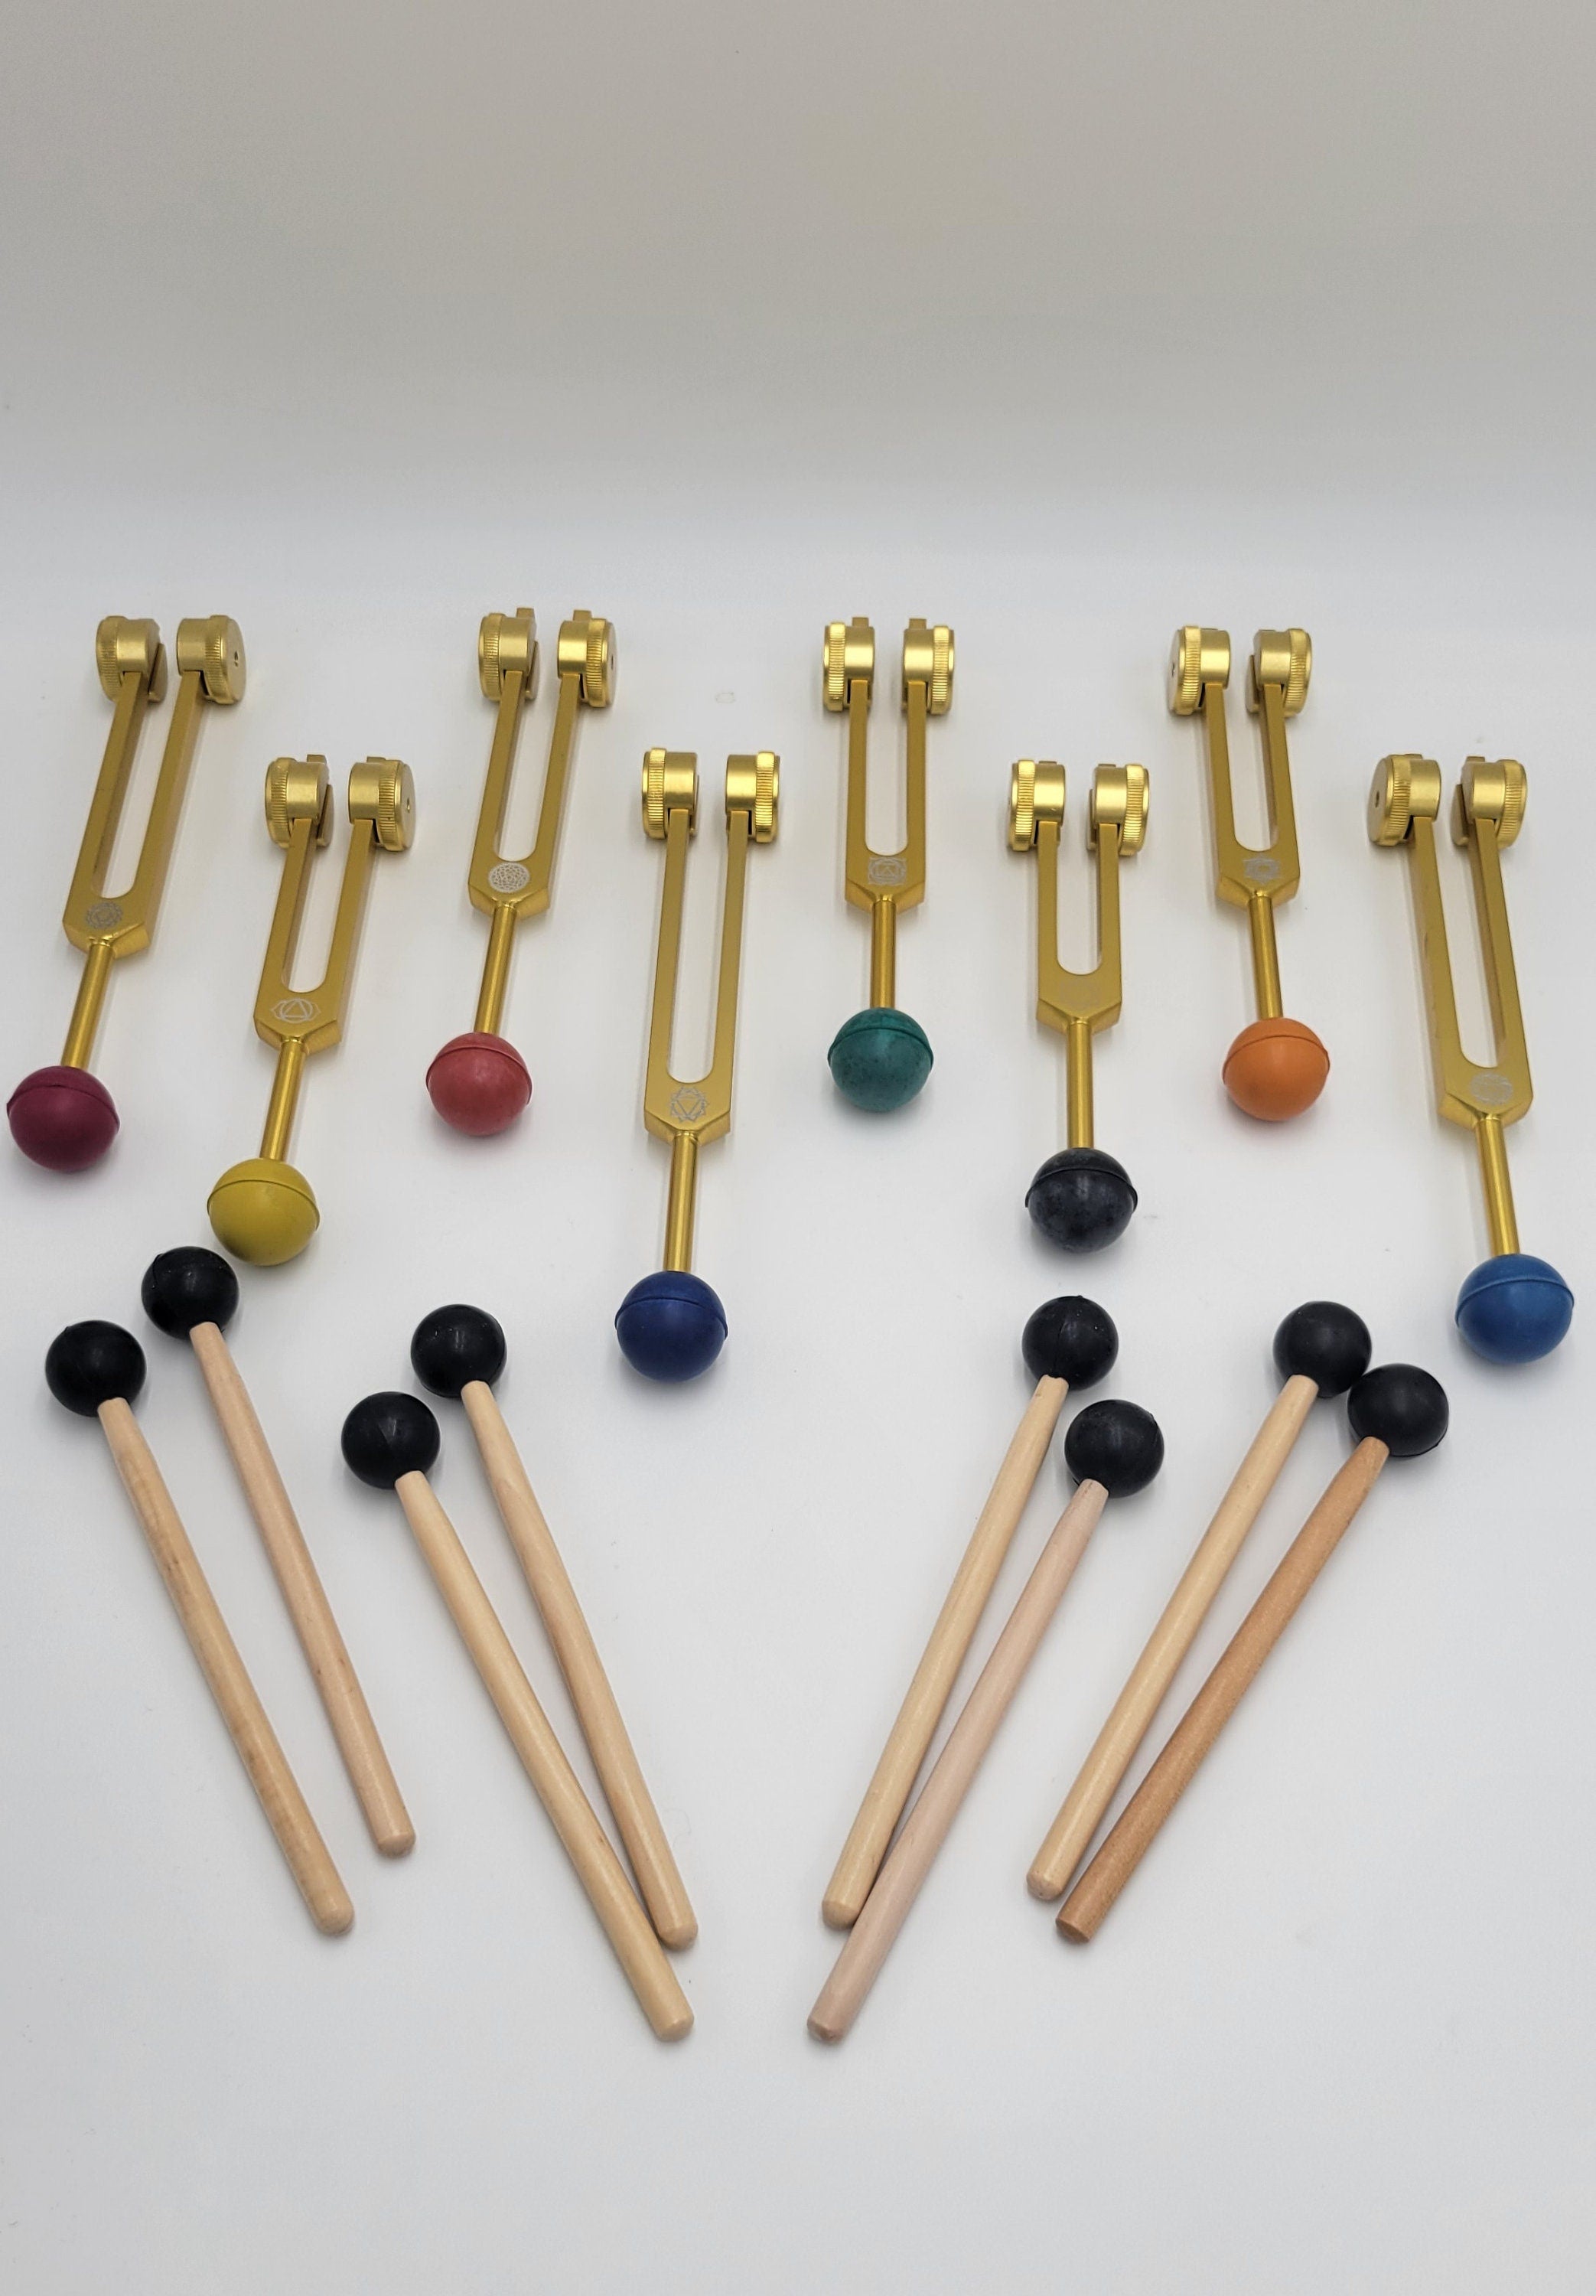 Professional Gold Weighted Chakra Tuning Forks with Removable Rubber Balls Individual Chakra Pouch 8 Mallets - Please Check ALL PICTURES - soundhealers